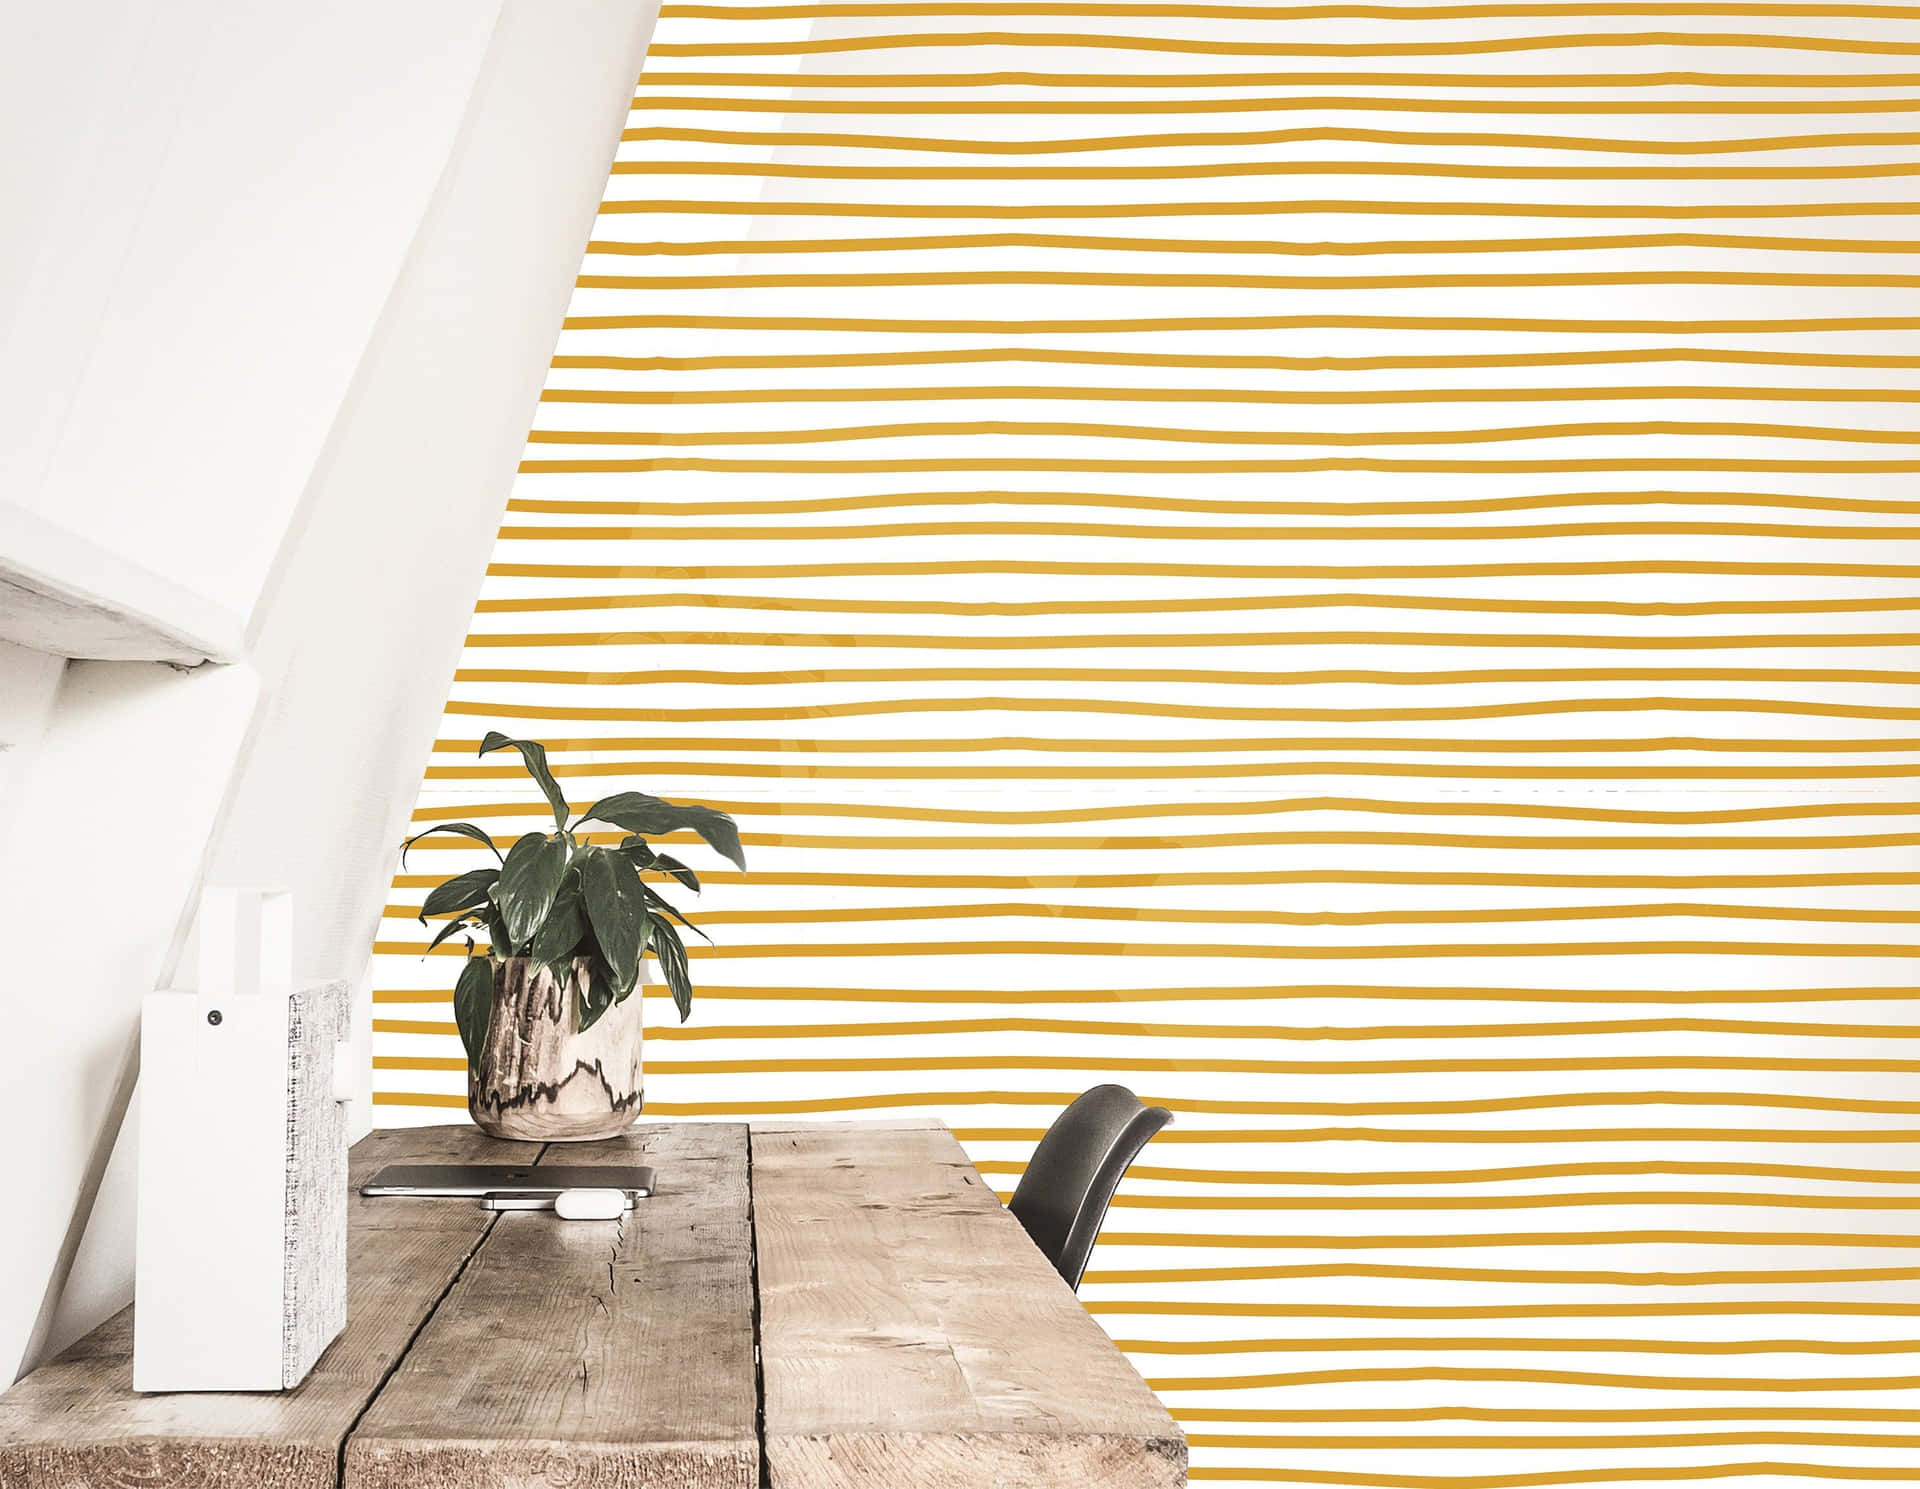 A Yellow And White Striped Wallpaper In A Room